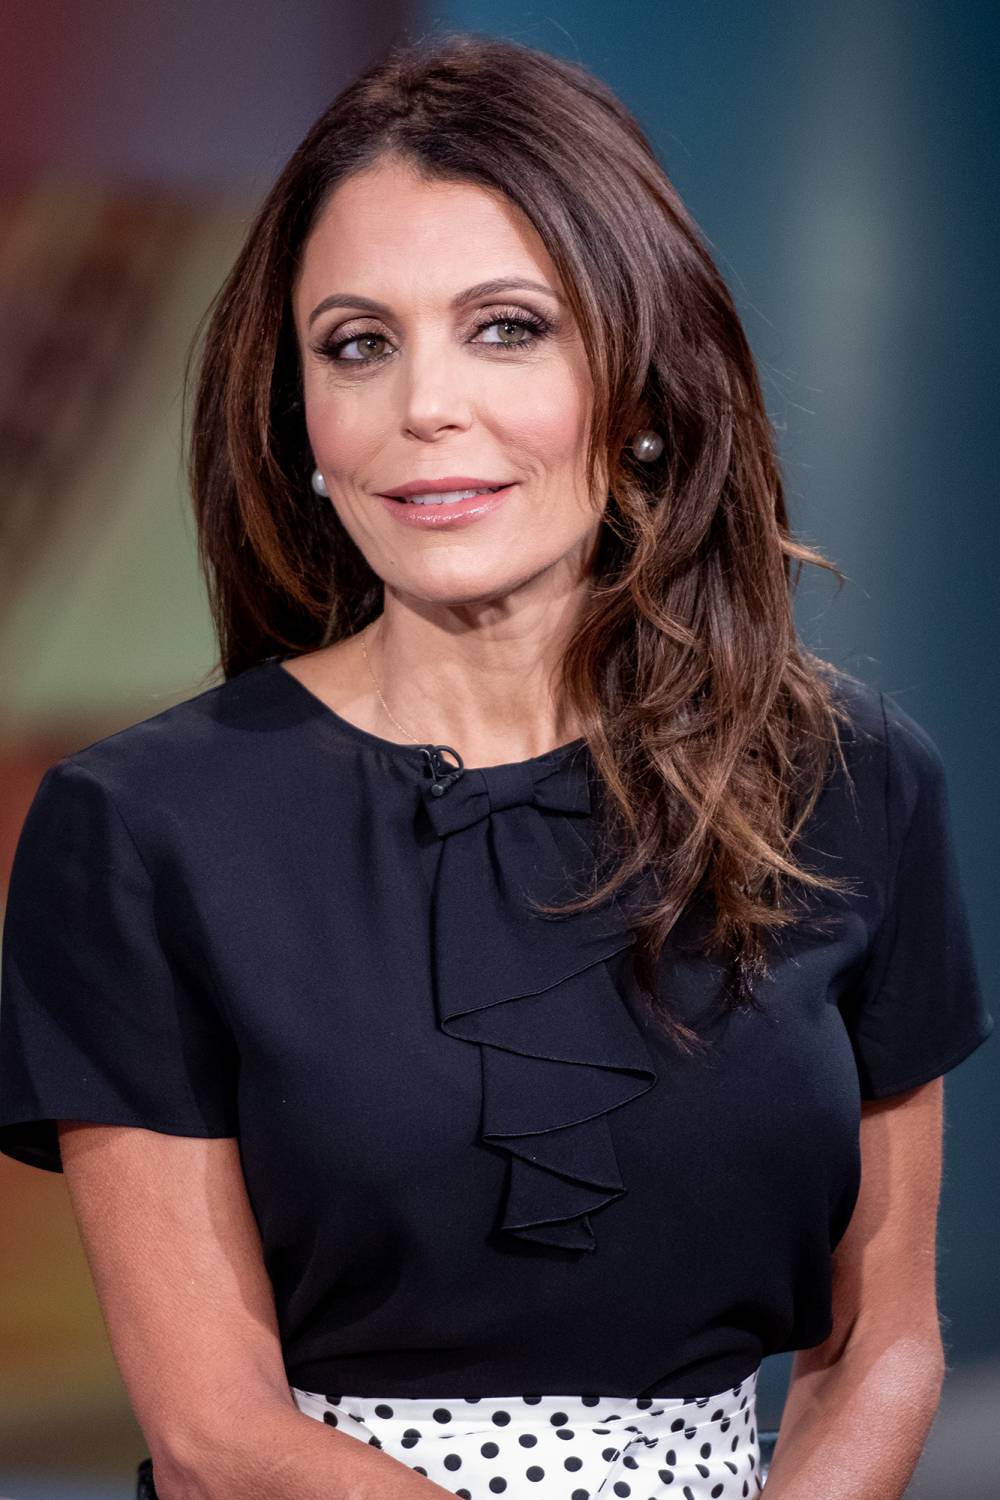 Bethenny Frankel Goes for Allergy Tests After Near-Death Experience: 'It's Fascinating Science'